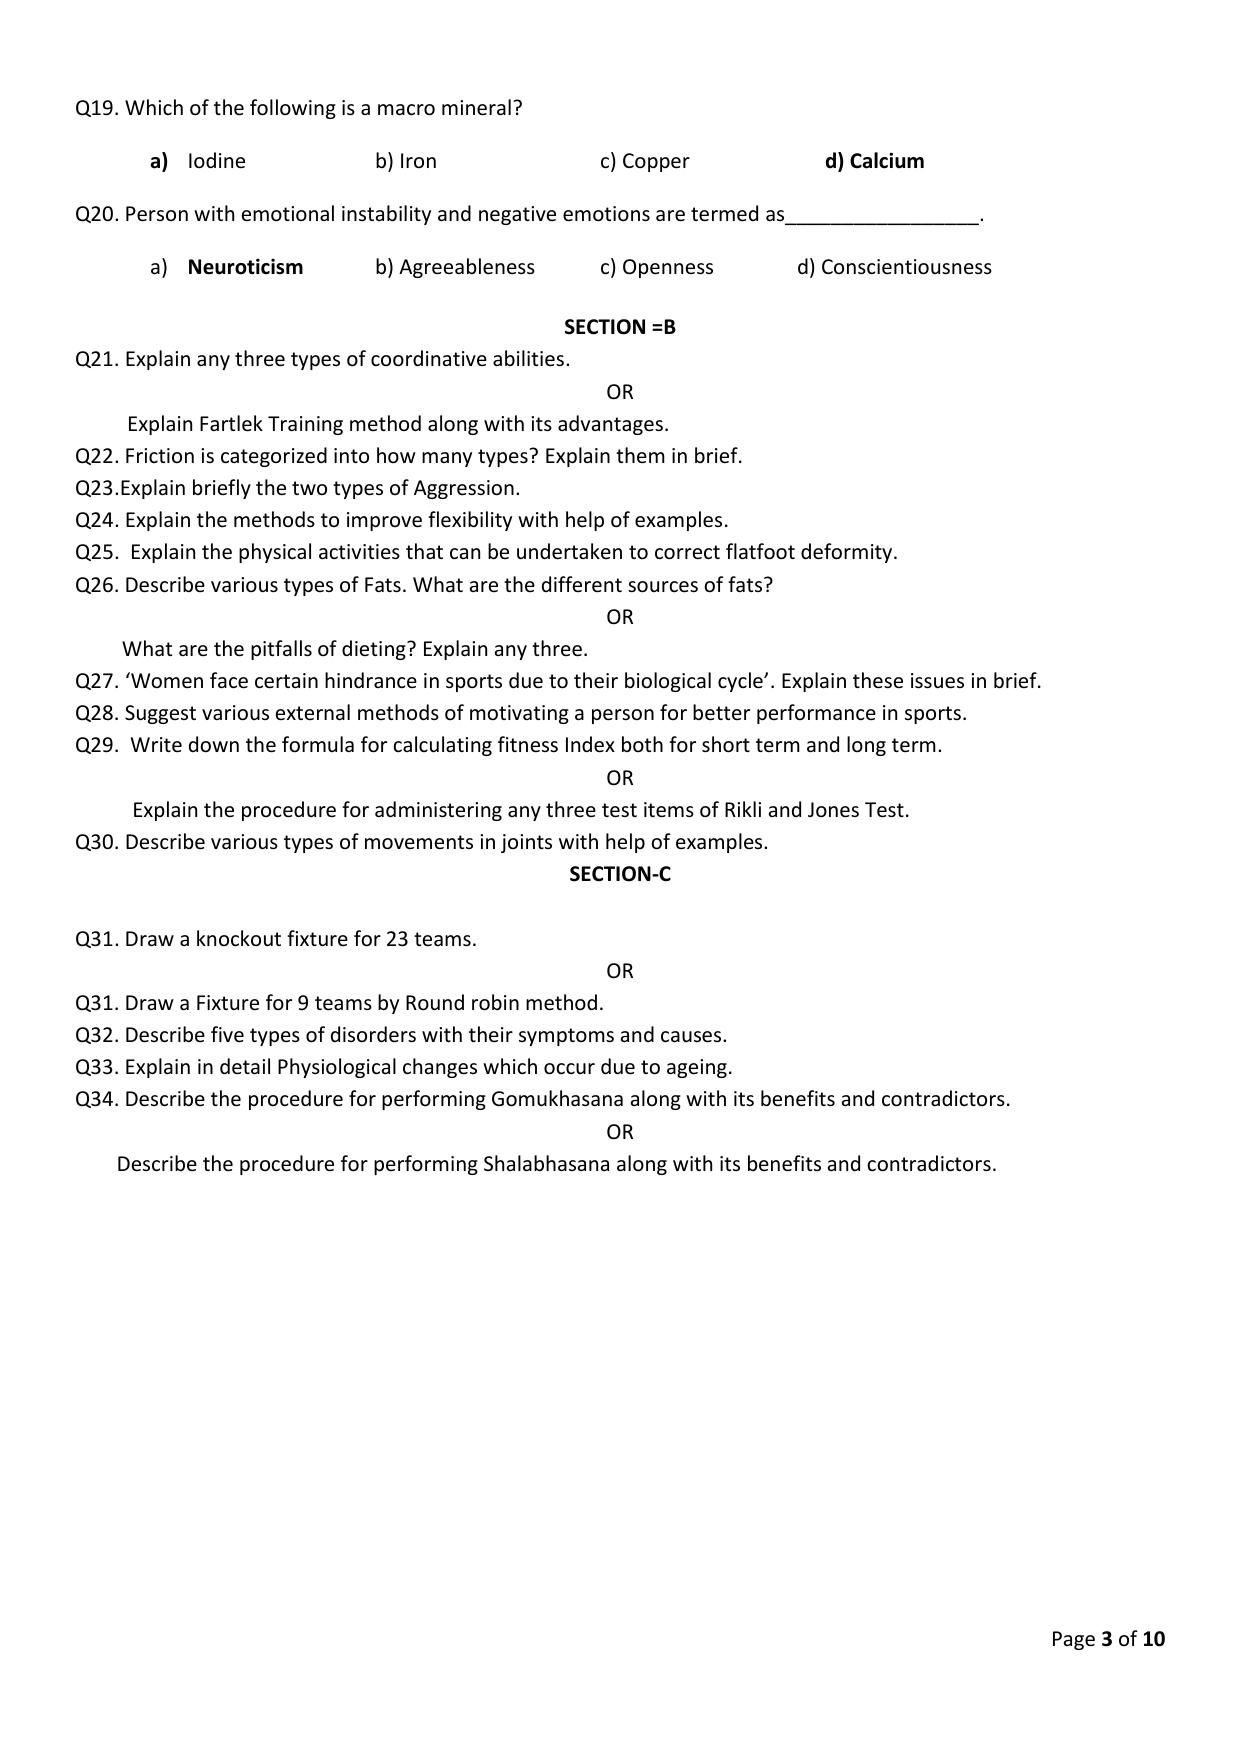 CBSE Class 12 Physical Education -Sample Paper 2019-20 - Page 3